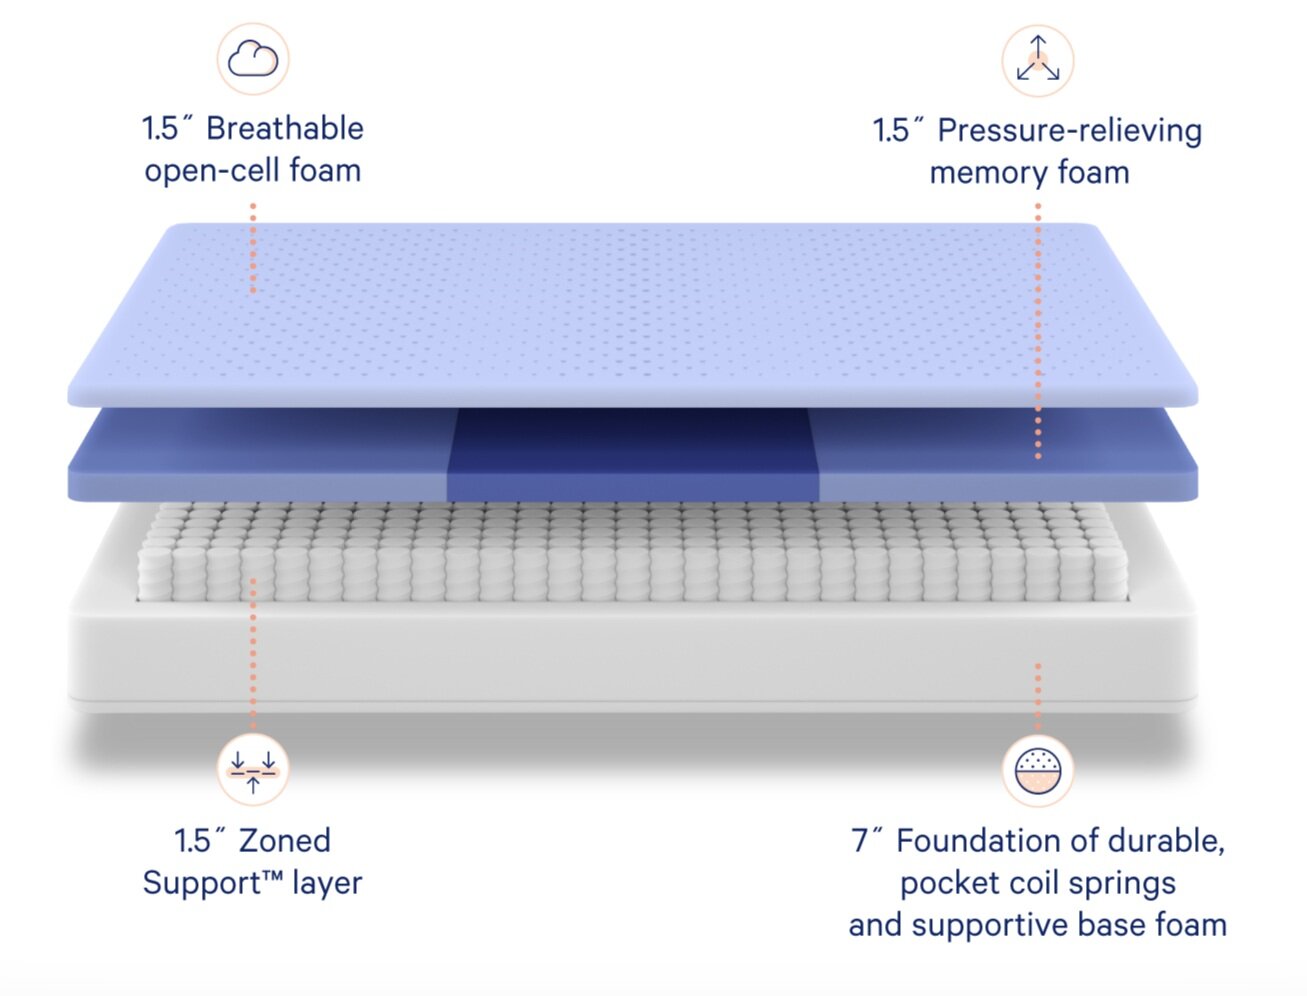 The  Casper Original Hybrid Mattress  option, at just $1,295 in queen size, offers superior support, with a slightly firmer than average “hugged” and nestled feel, without bottoming into an abyss, a common problem in many all foam mattresses I’ve reviewed.